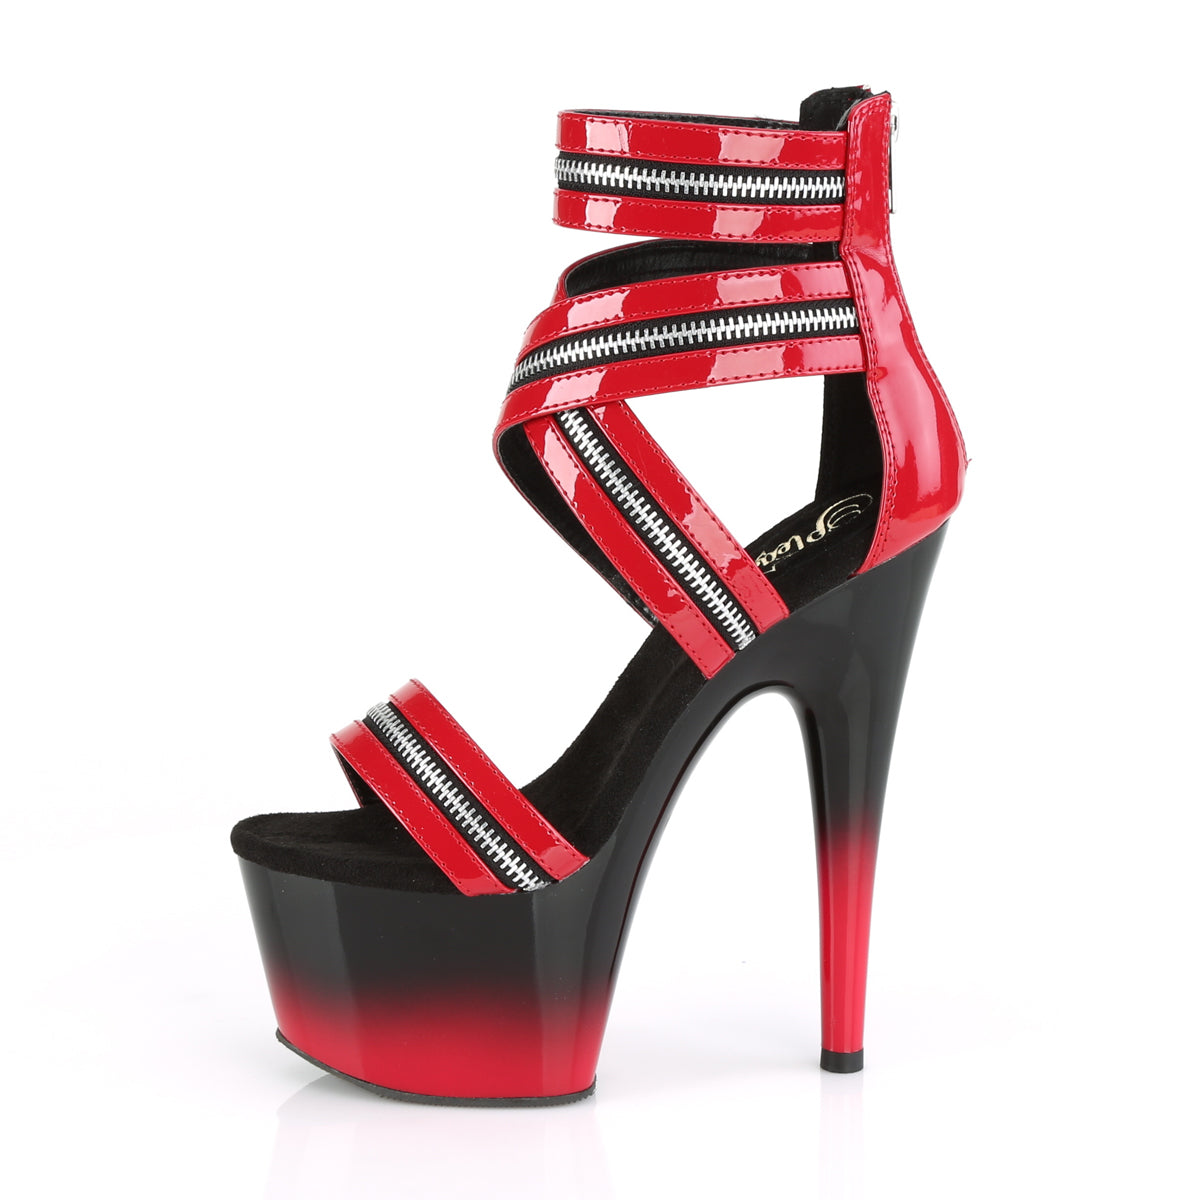 ADORE-766 Pleaser 7 Inch Heel Red Strippers Sandals-Pleaser- Sexy Shoes Pole Dance Heels